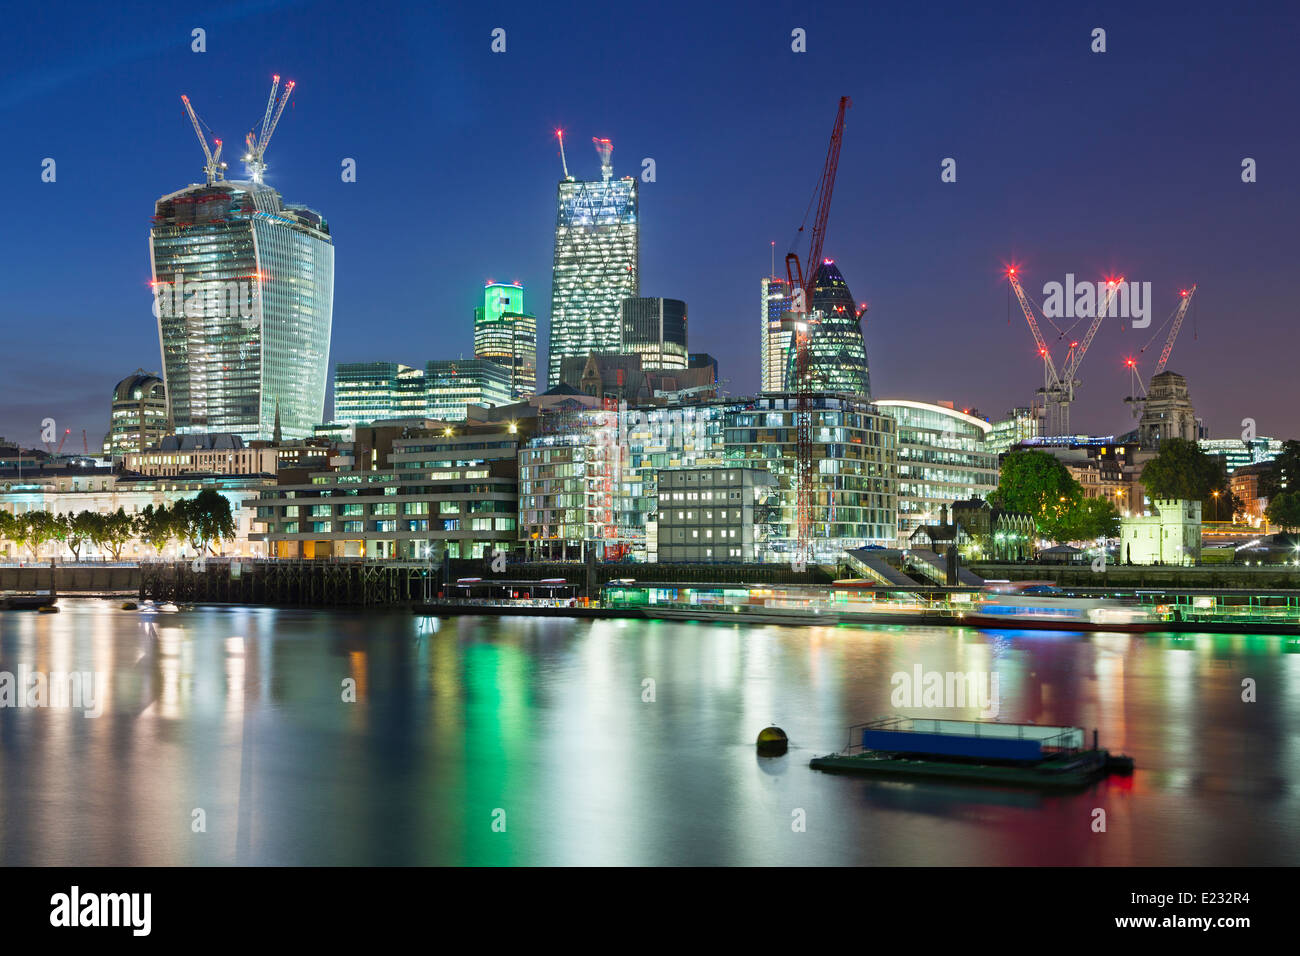 Night view over the Thames River in London to the city with several new skyscrapers Stock Photo